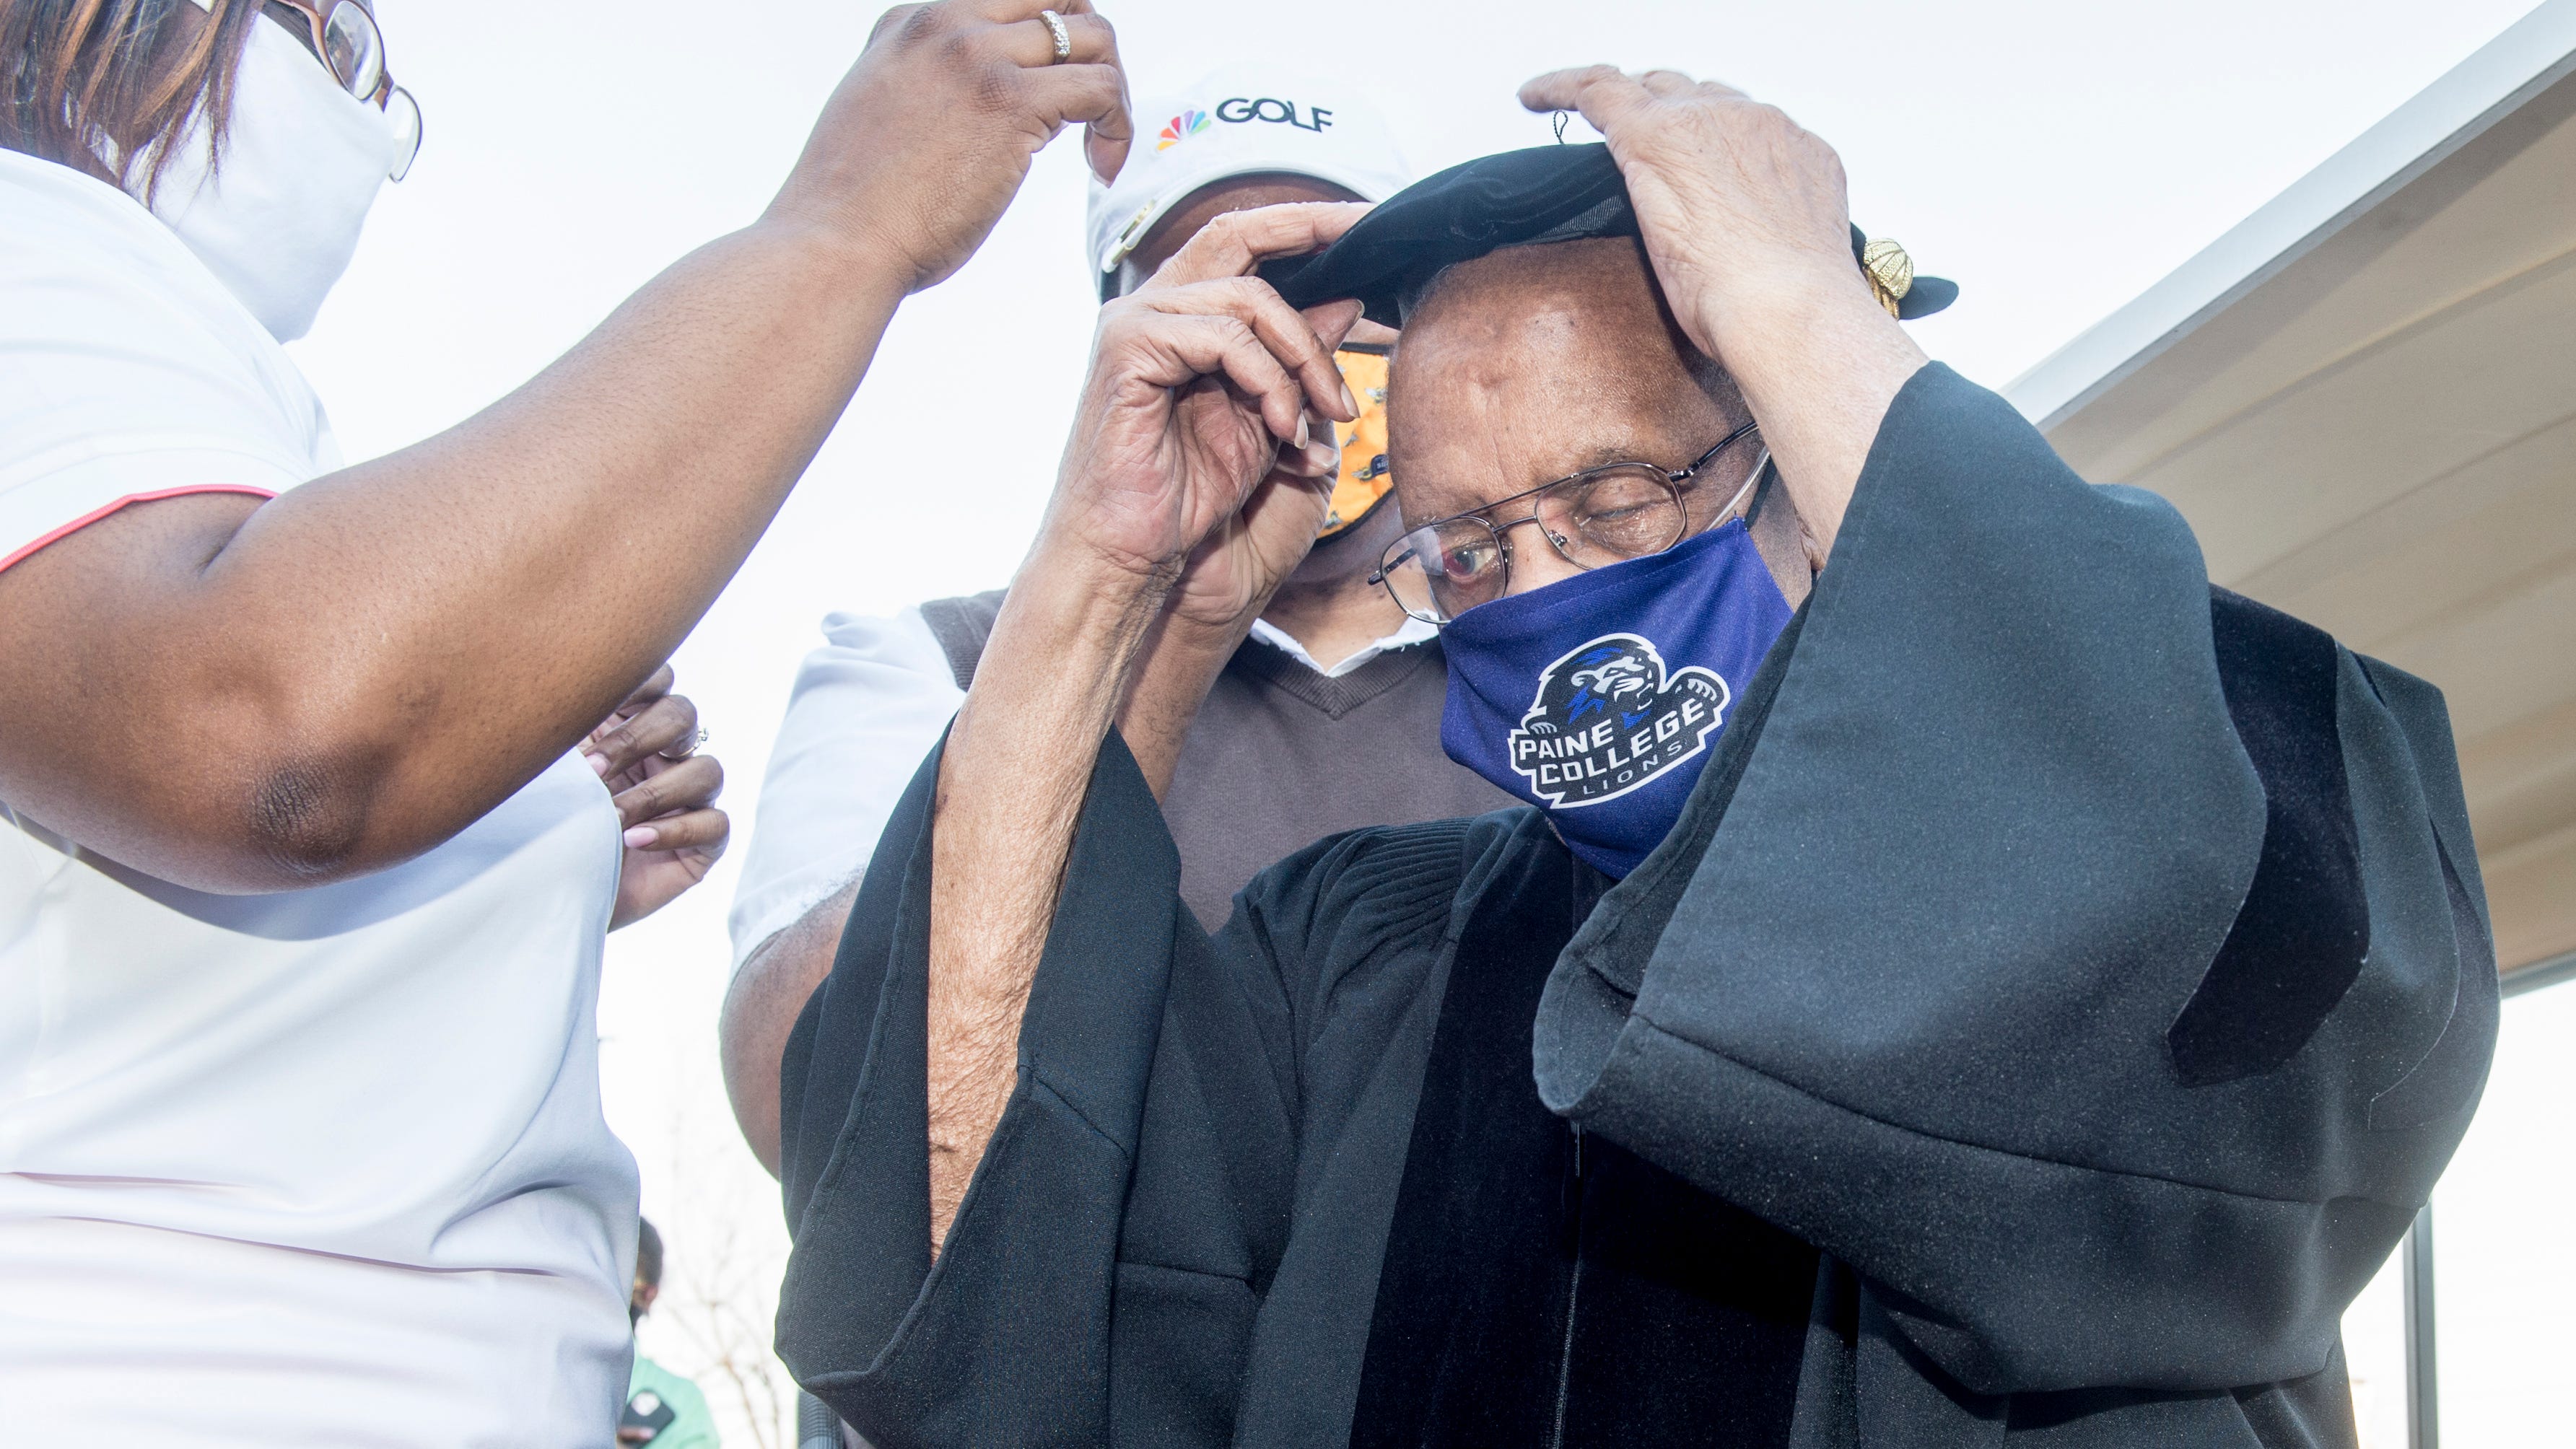 After donning his robe, Lee Elder places his graduation tam on his head during Tuesday's honorary doctorate ceremony at Paine College.